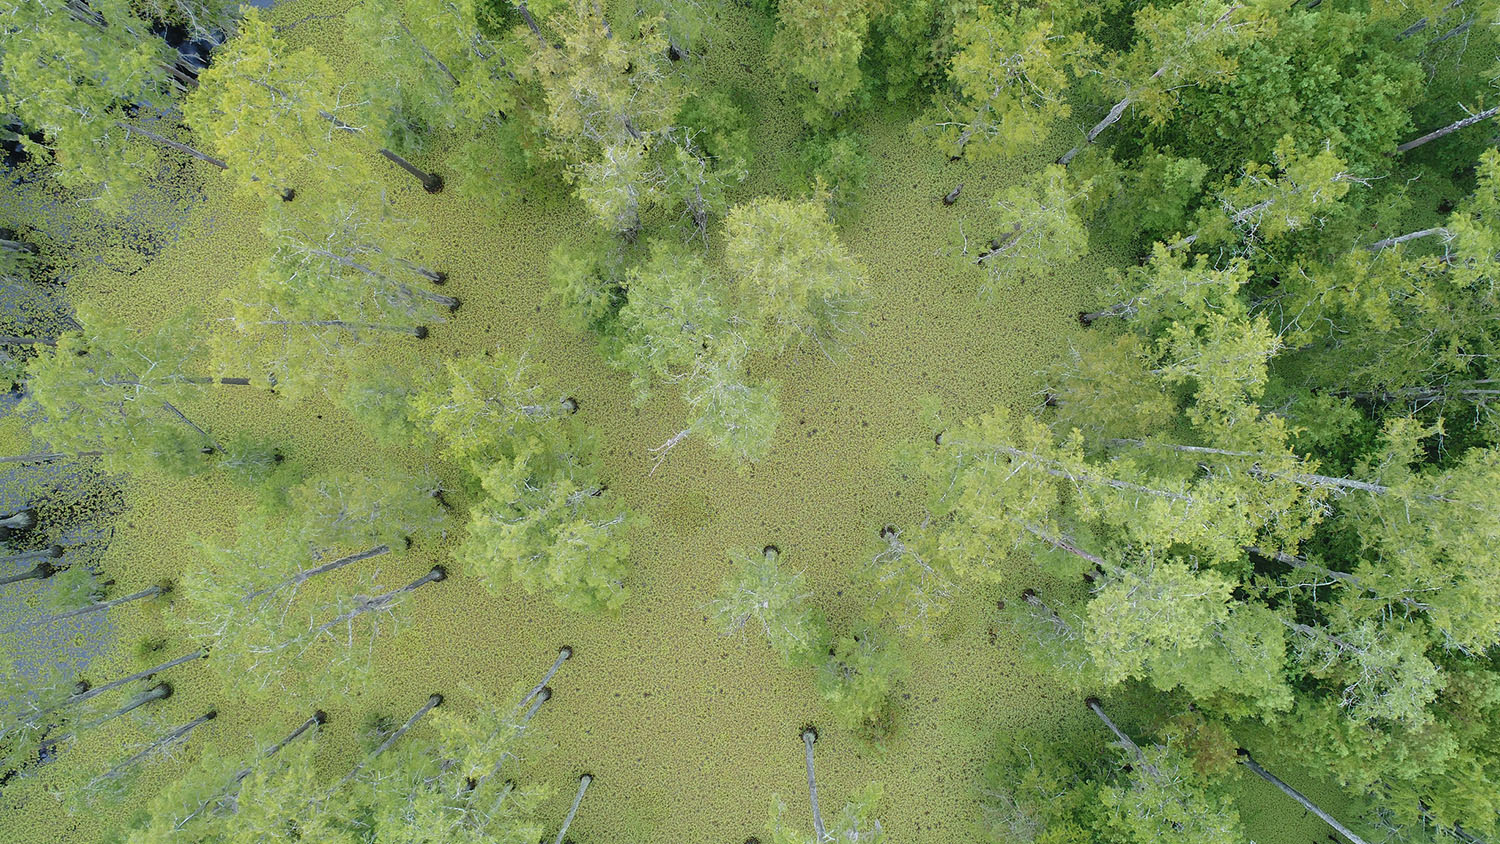 aerial view of a wetland forest shows trees and large patches of floating weed - NC State Researchers: Show Us What You're Working On - Parks Recreation and Tourism Management NC State University